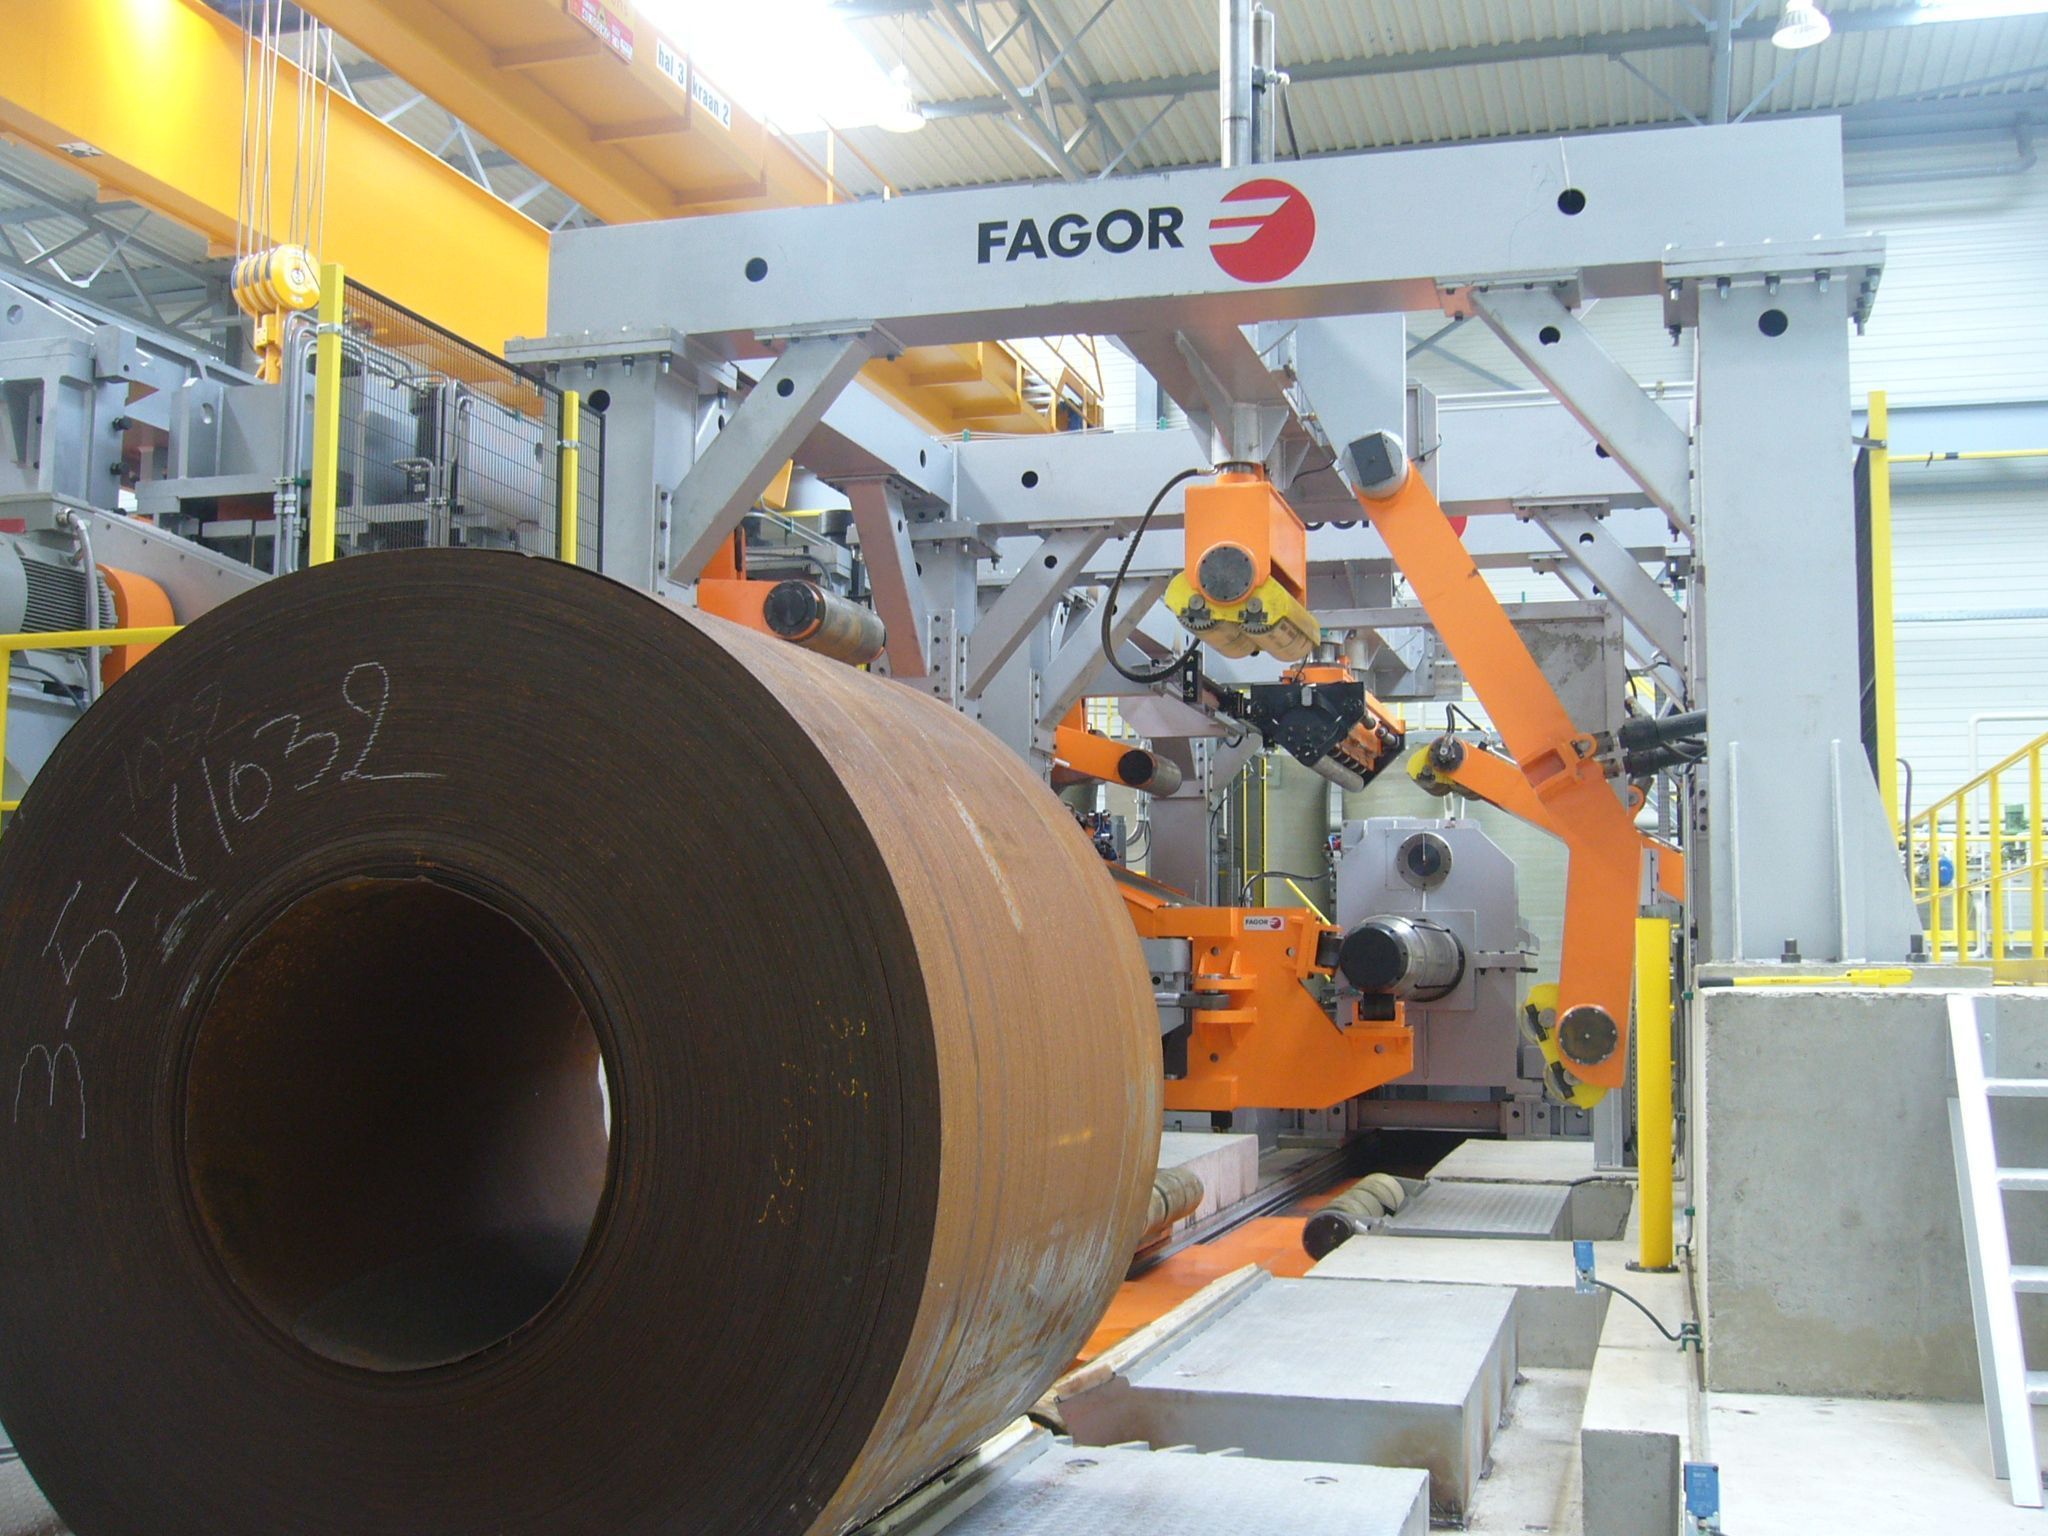 Fagor Arrasate event: SWEDISH STEEL PRODUCER SSAB PLACES ORDERS WITH FAGOR ARRASATE